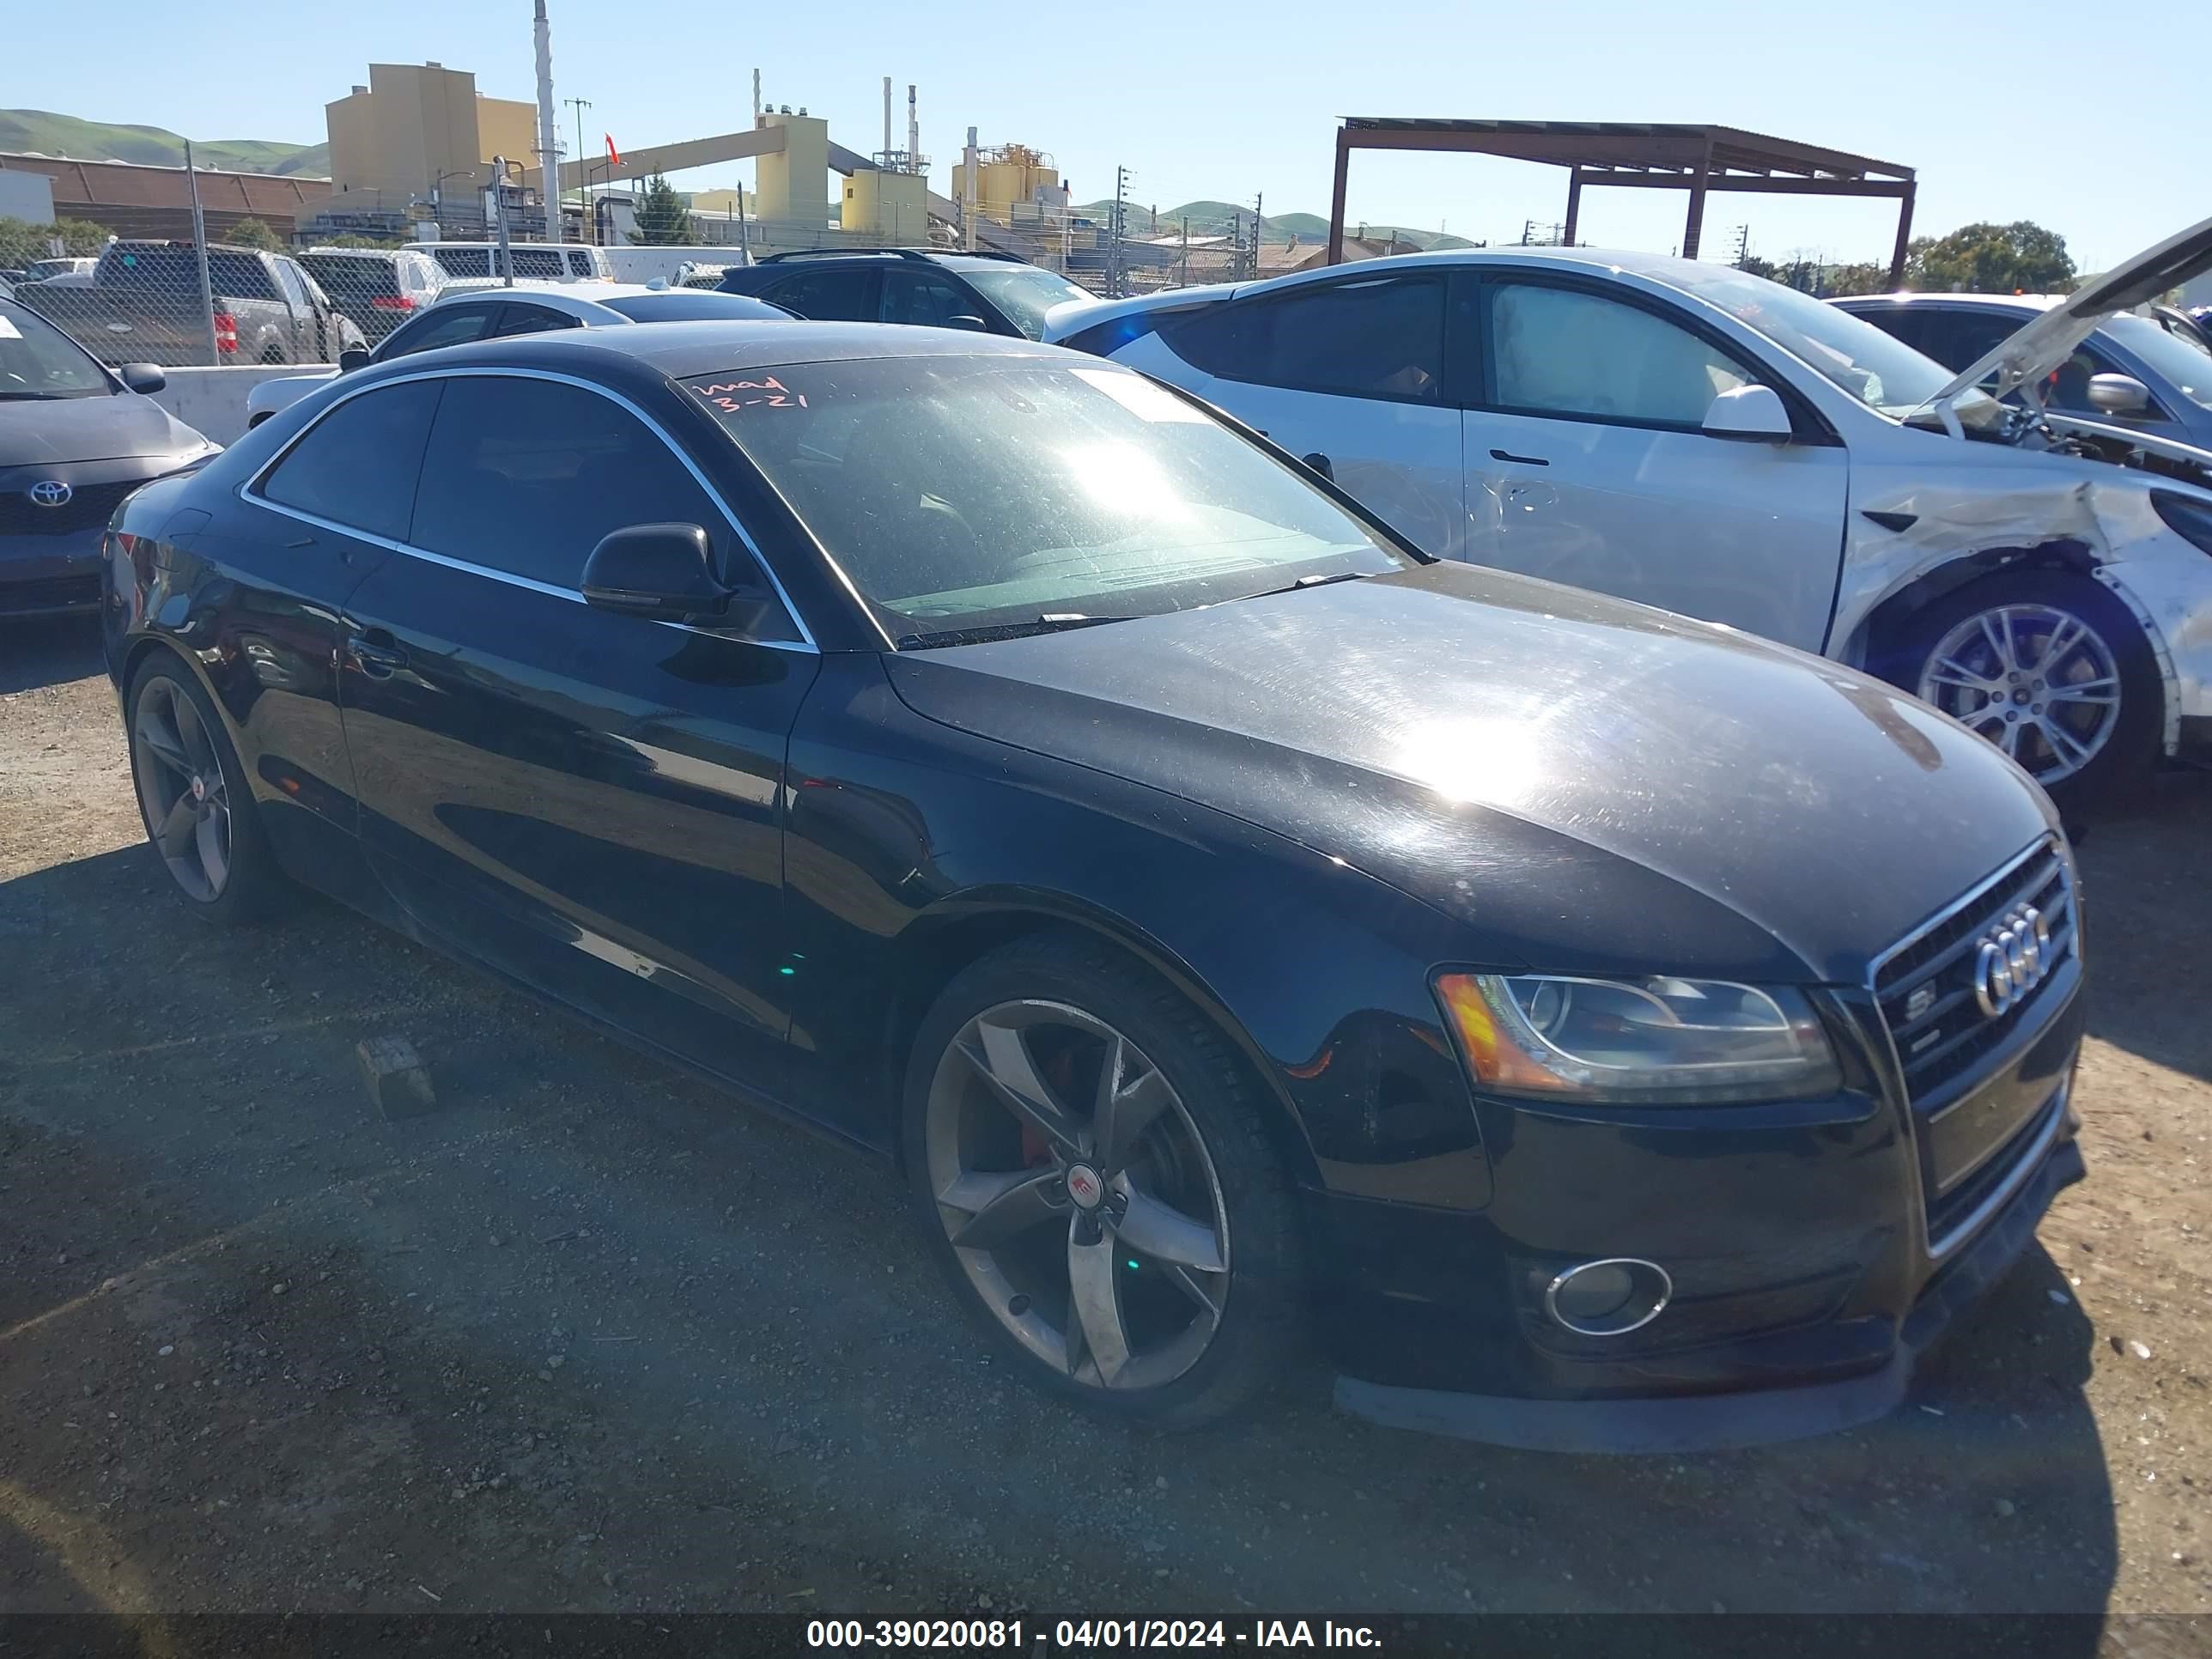 vin: WAUDK78T48A046002 WAUDK78T48A046002 2008 audi a5 3200 for Sale in 94565, 2780 Willow Pass Road, Bay Point, California, USA